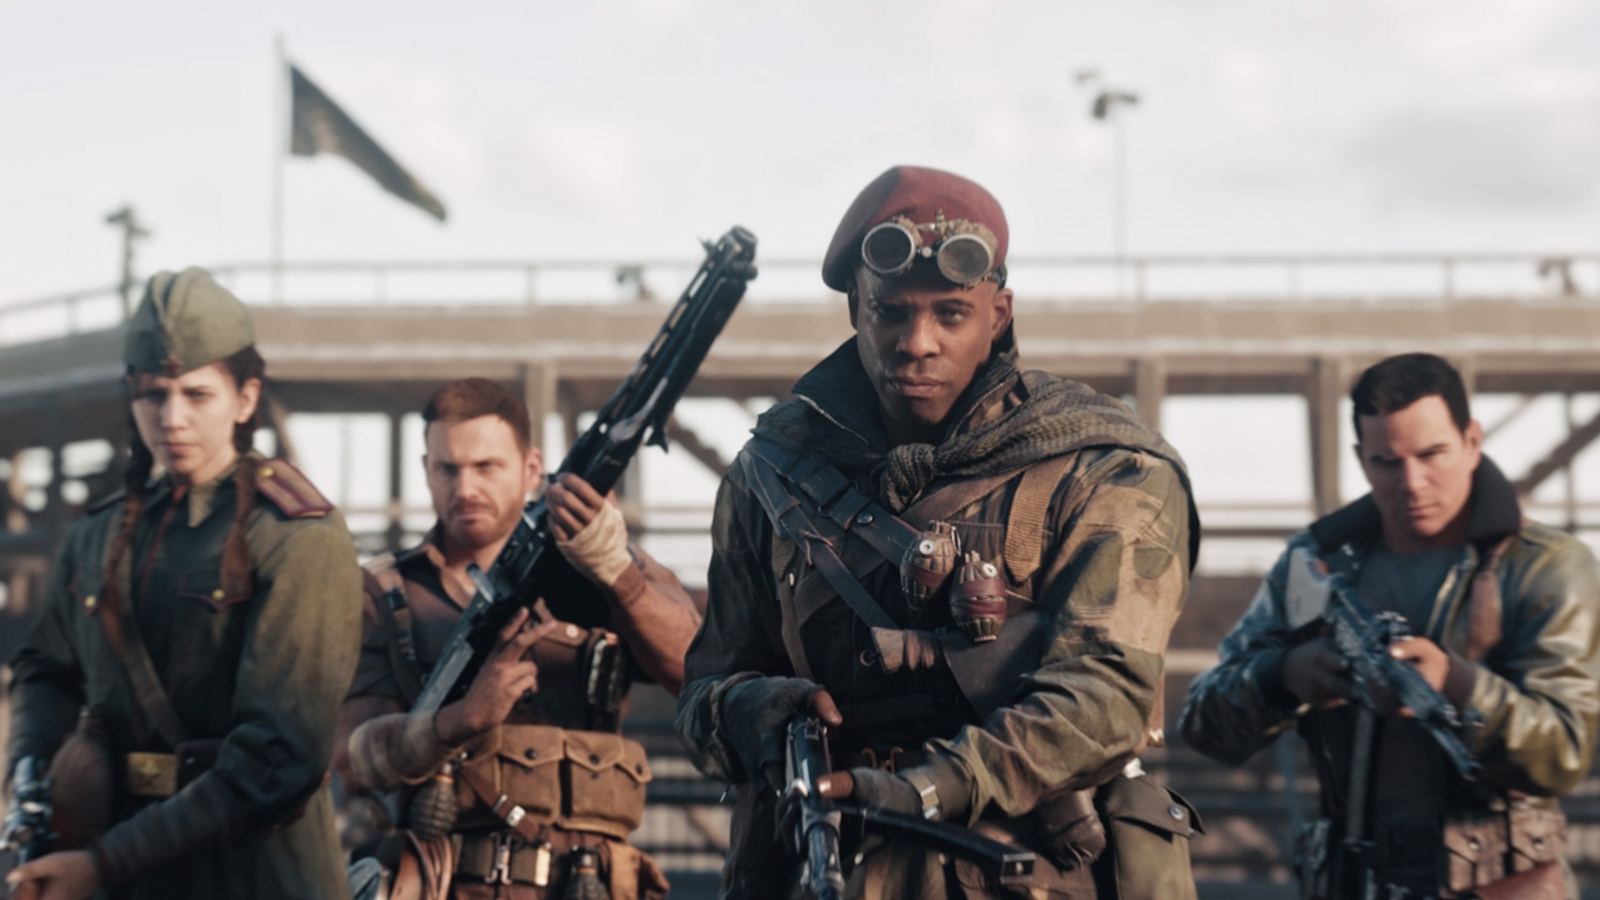 Call of Duty: WWII is Getting a Third DLC Expansion Later This Month